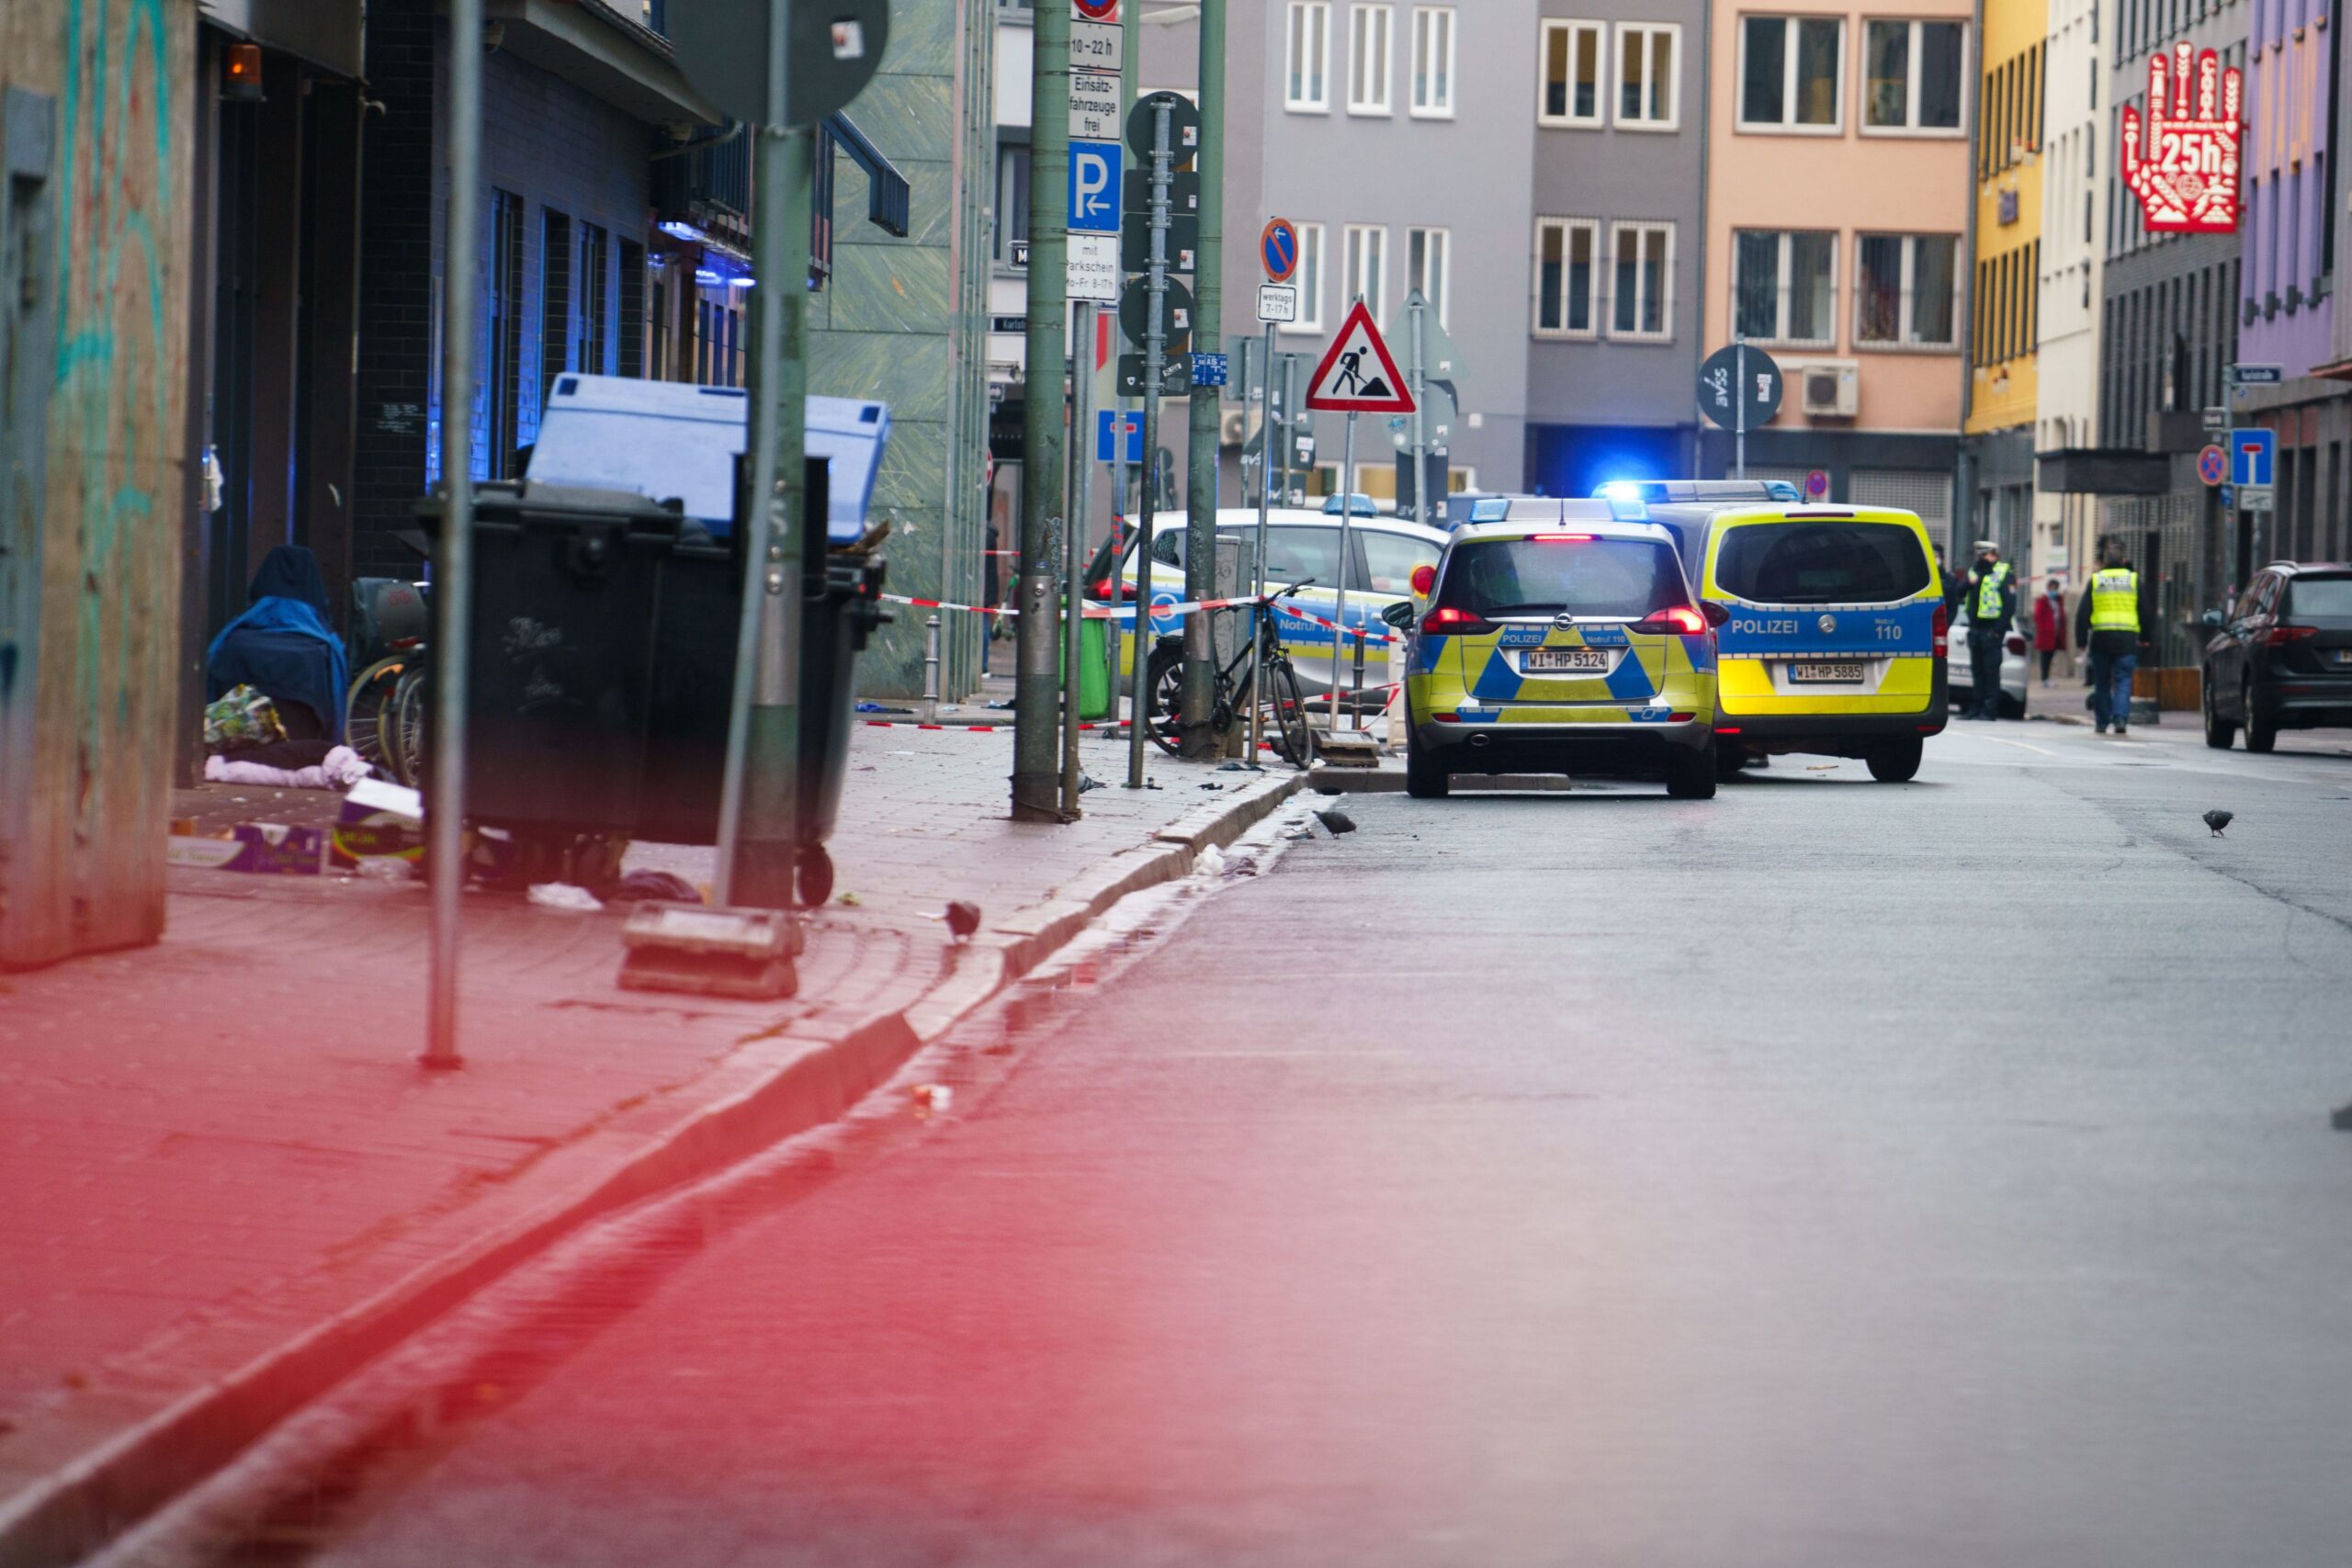 26 January 2021, Hessen, Frankfurt/Main: Police vehicles park in Frankfurt's Bahnhofsviertel in Niddastrasse, where there was a suspected knife attack with several people injured this morning. A suspect has been arrested, a police spokesman said. Photo: Frank Rumpenhorst/dpa